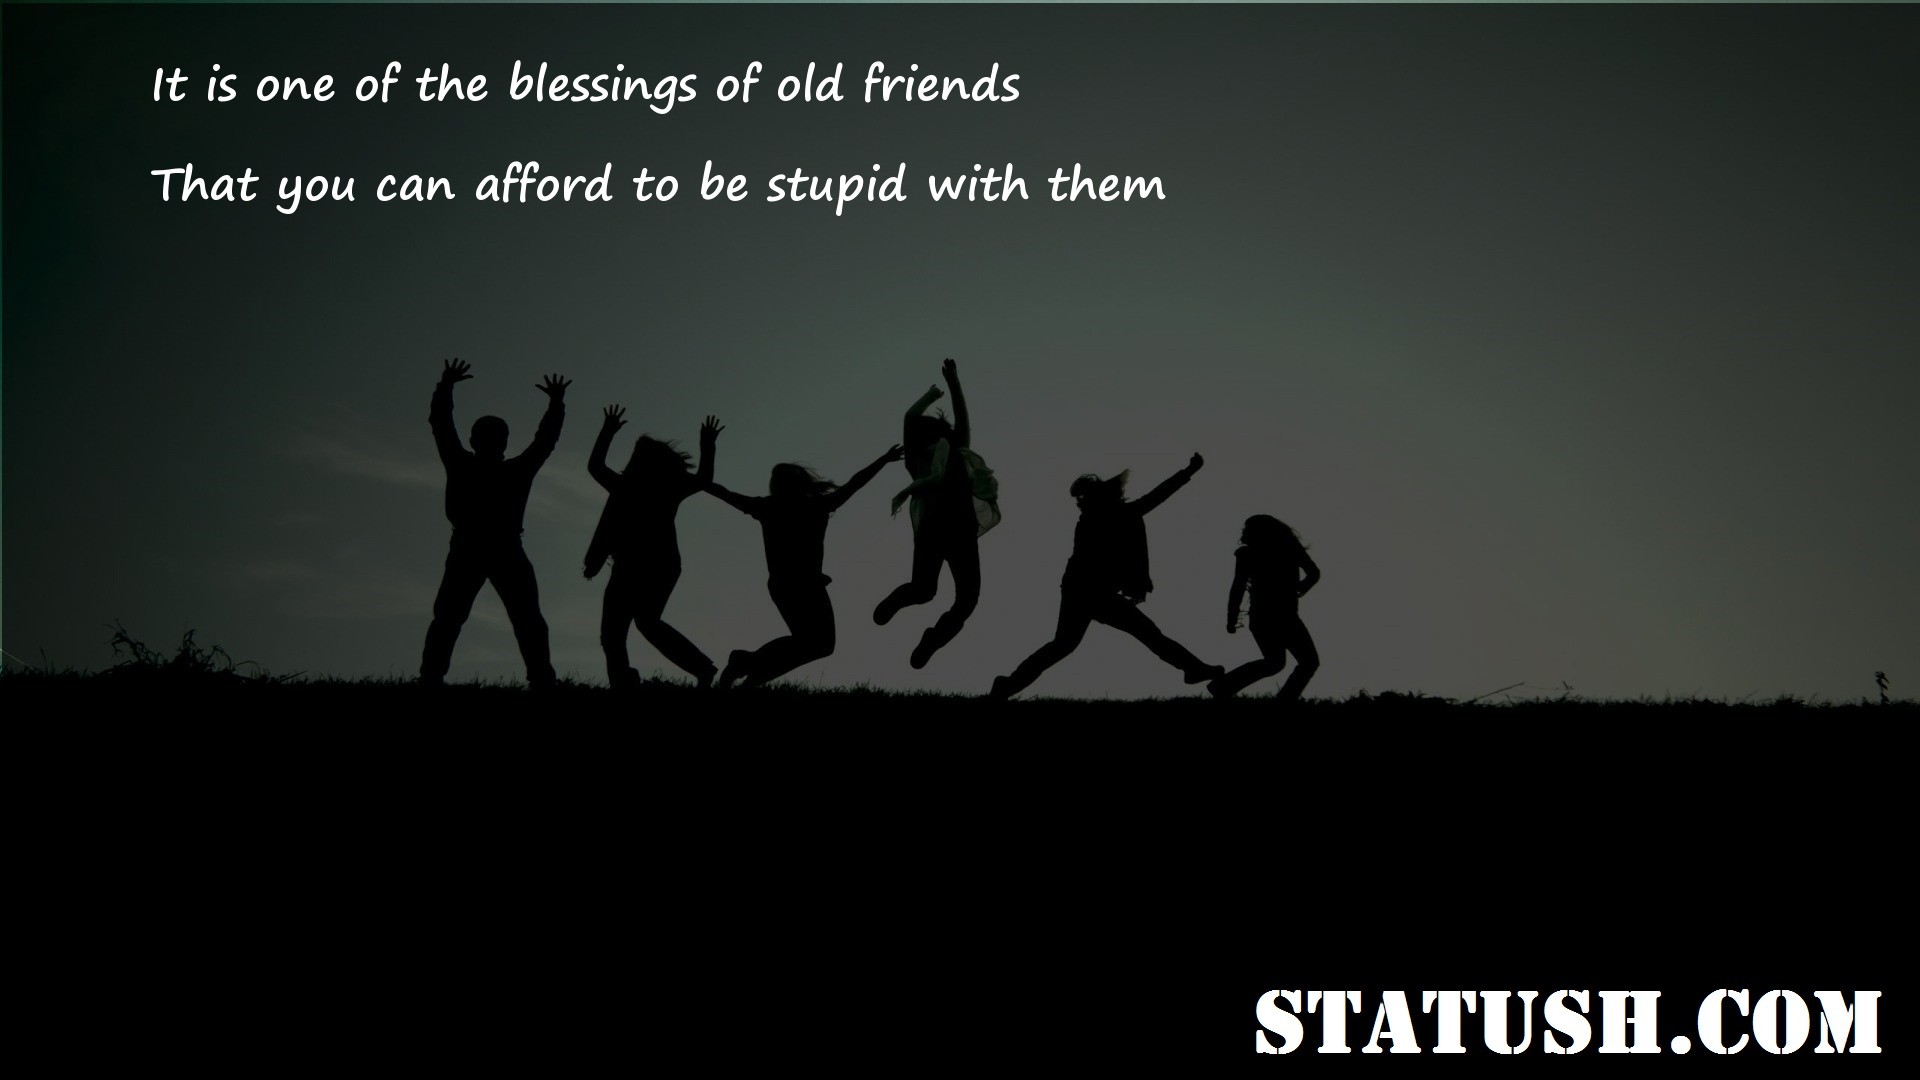 It is one of the blessings of old friends Friendship Quotes at statush.com